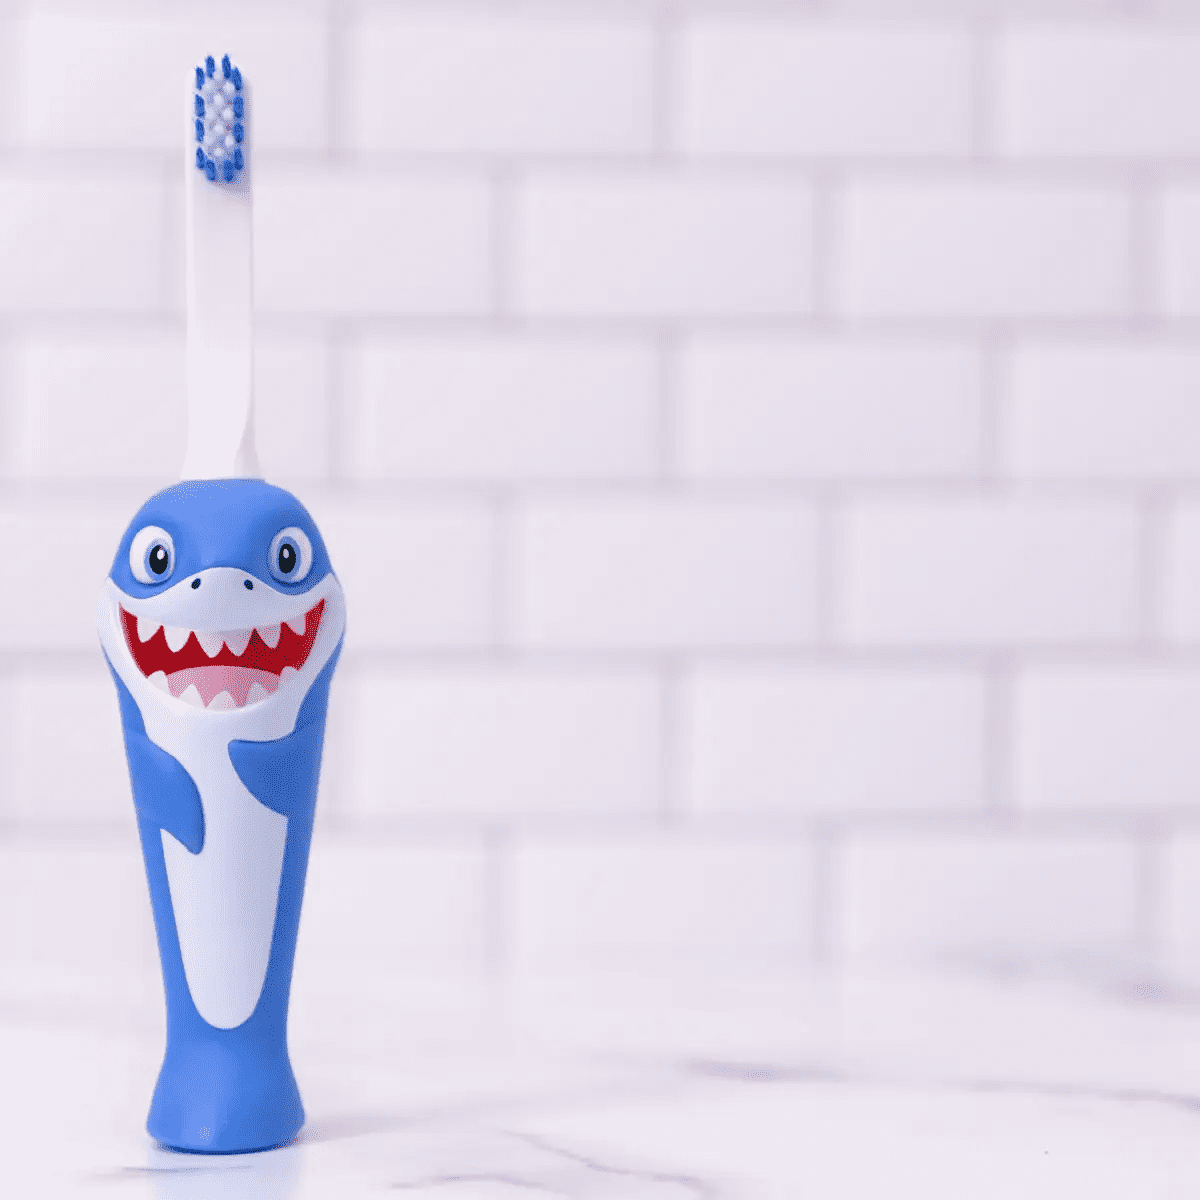 Chompers the Shark toothbrush with a unique shark design